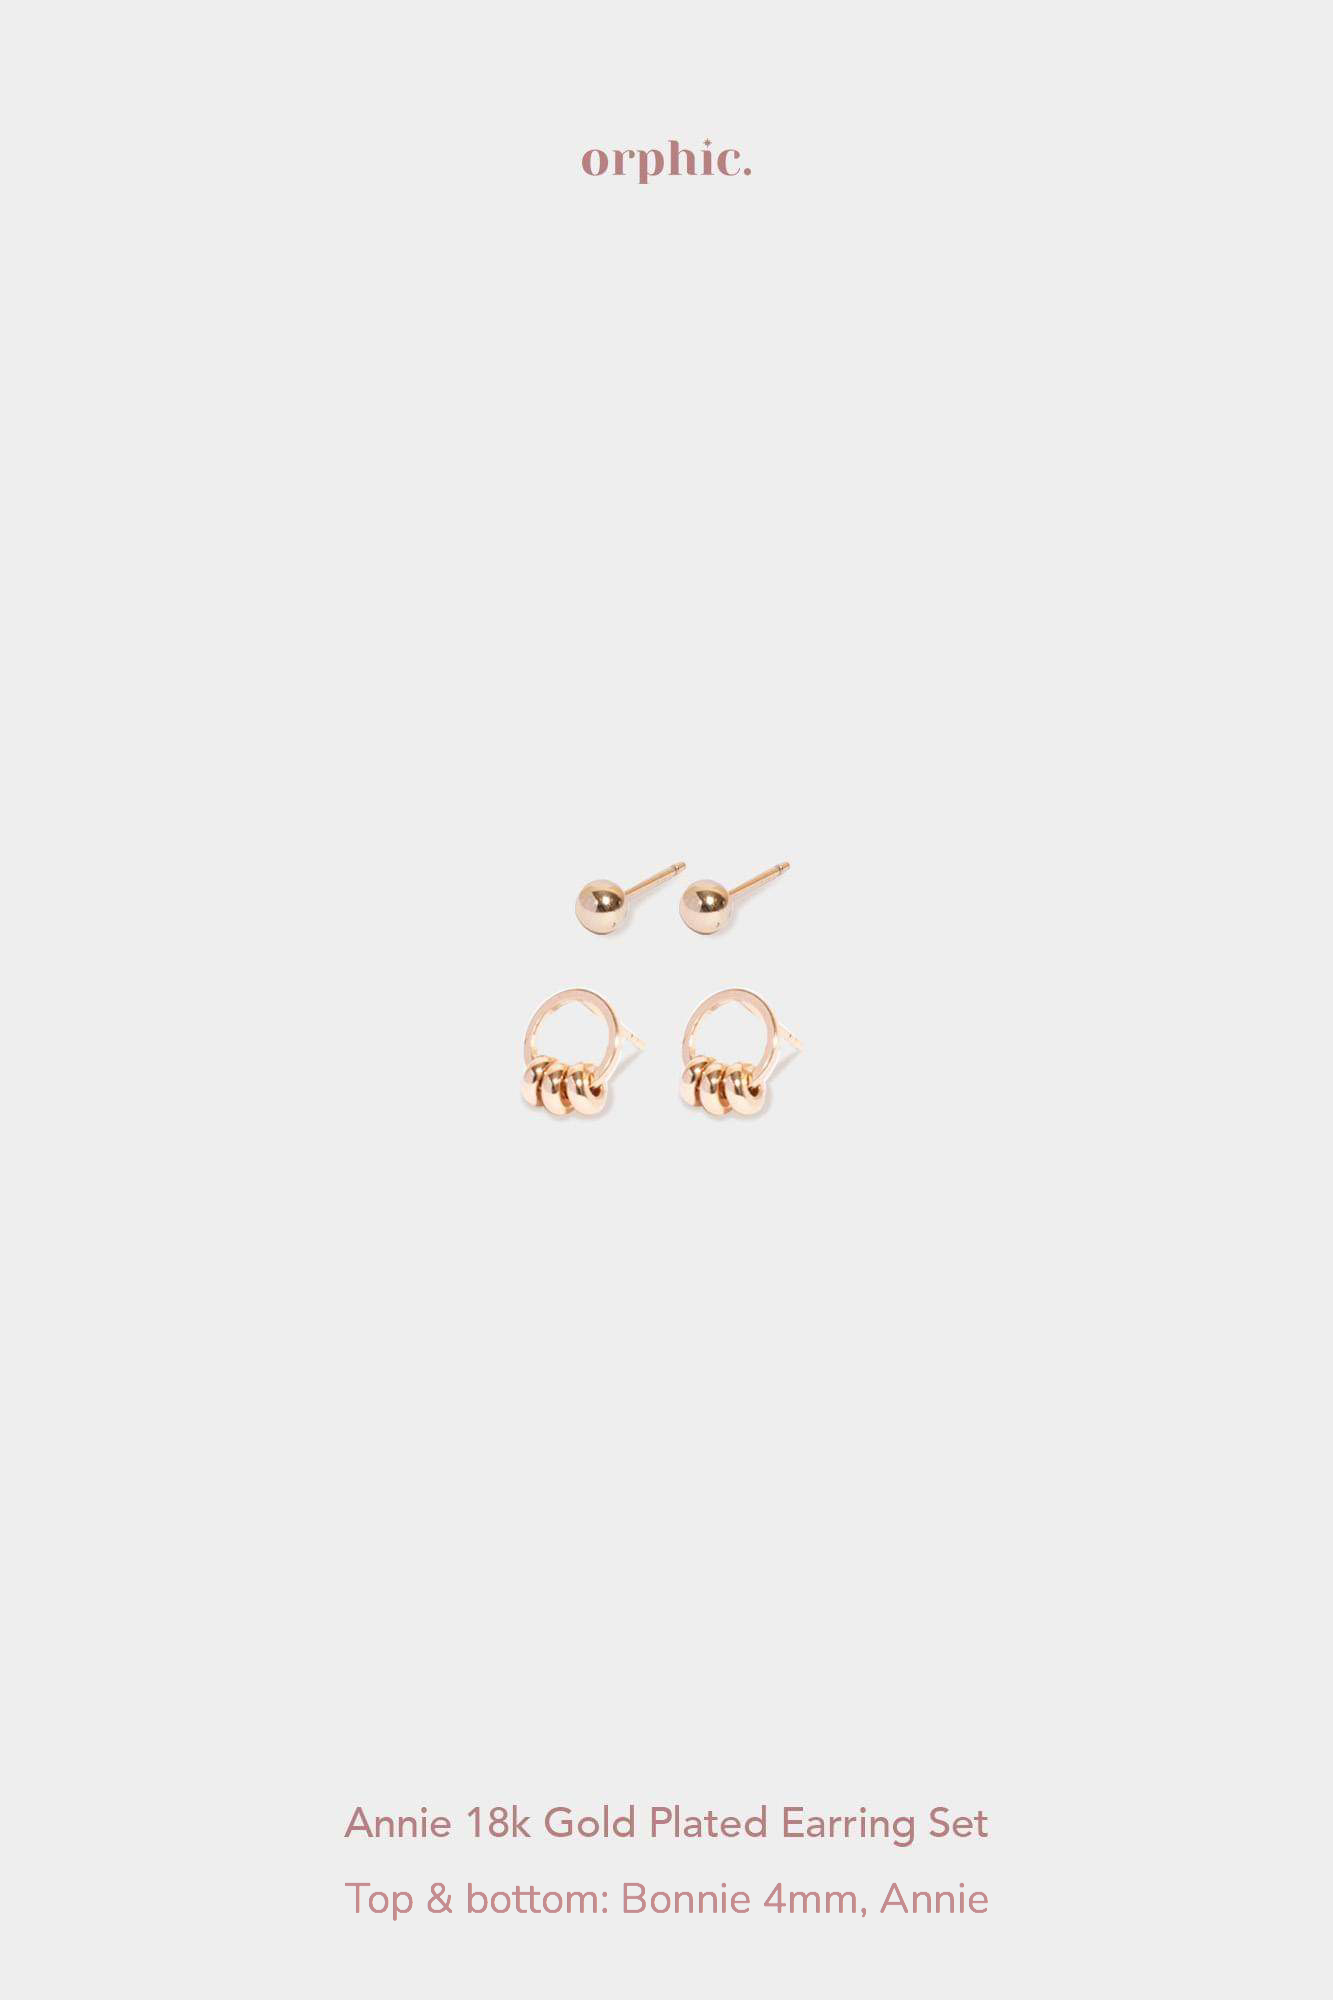 Annie 18k Gold Plated Earring Set